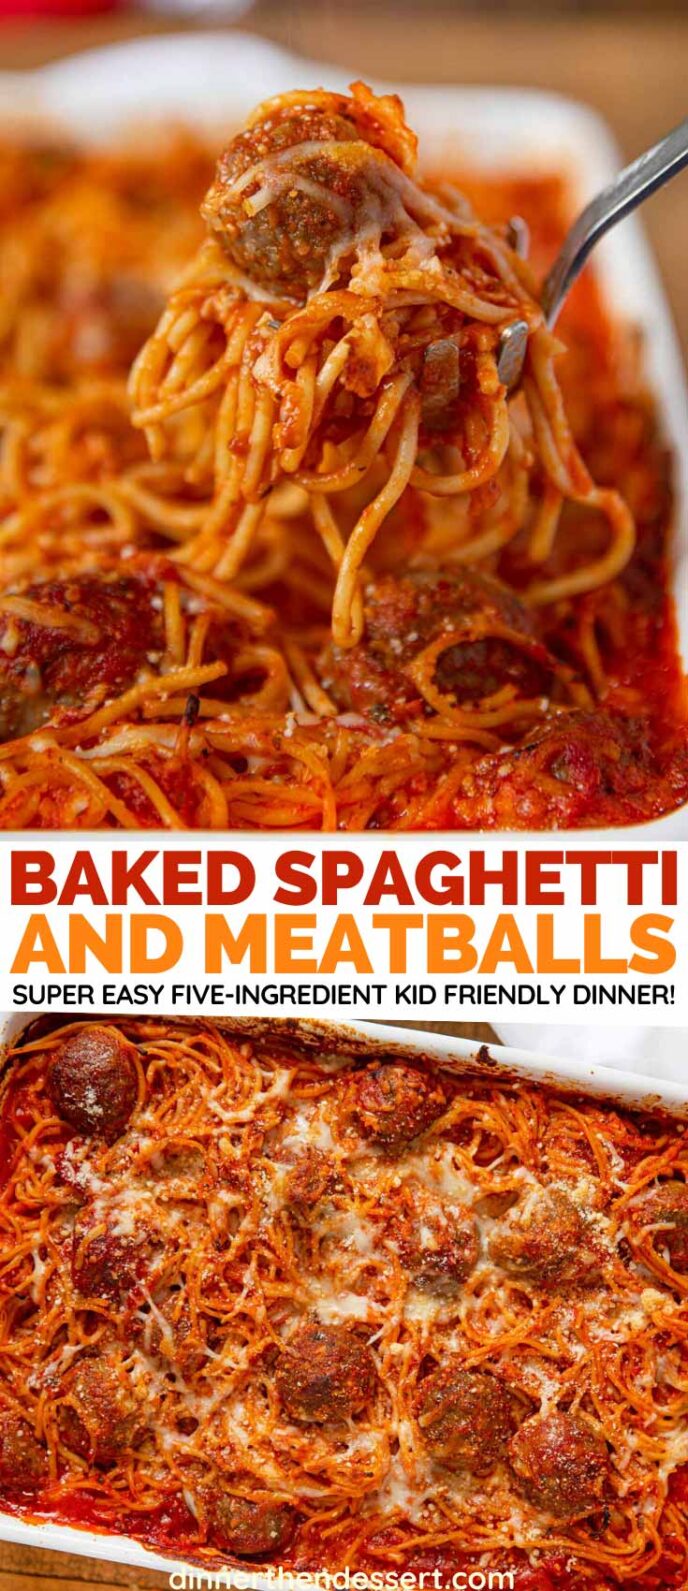 Baked Spaghetti and Meatballs collage